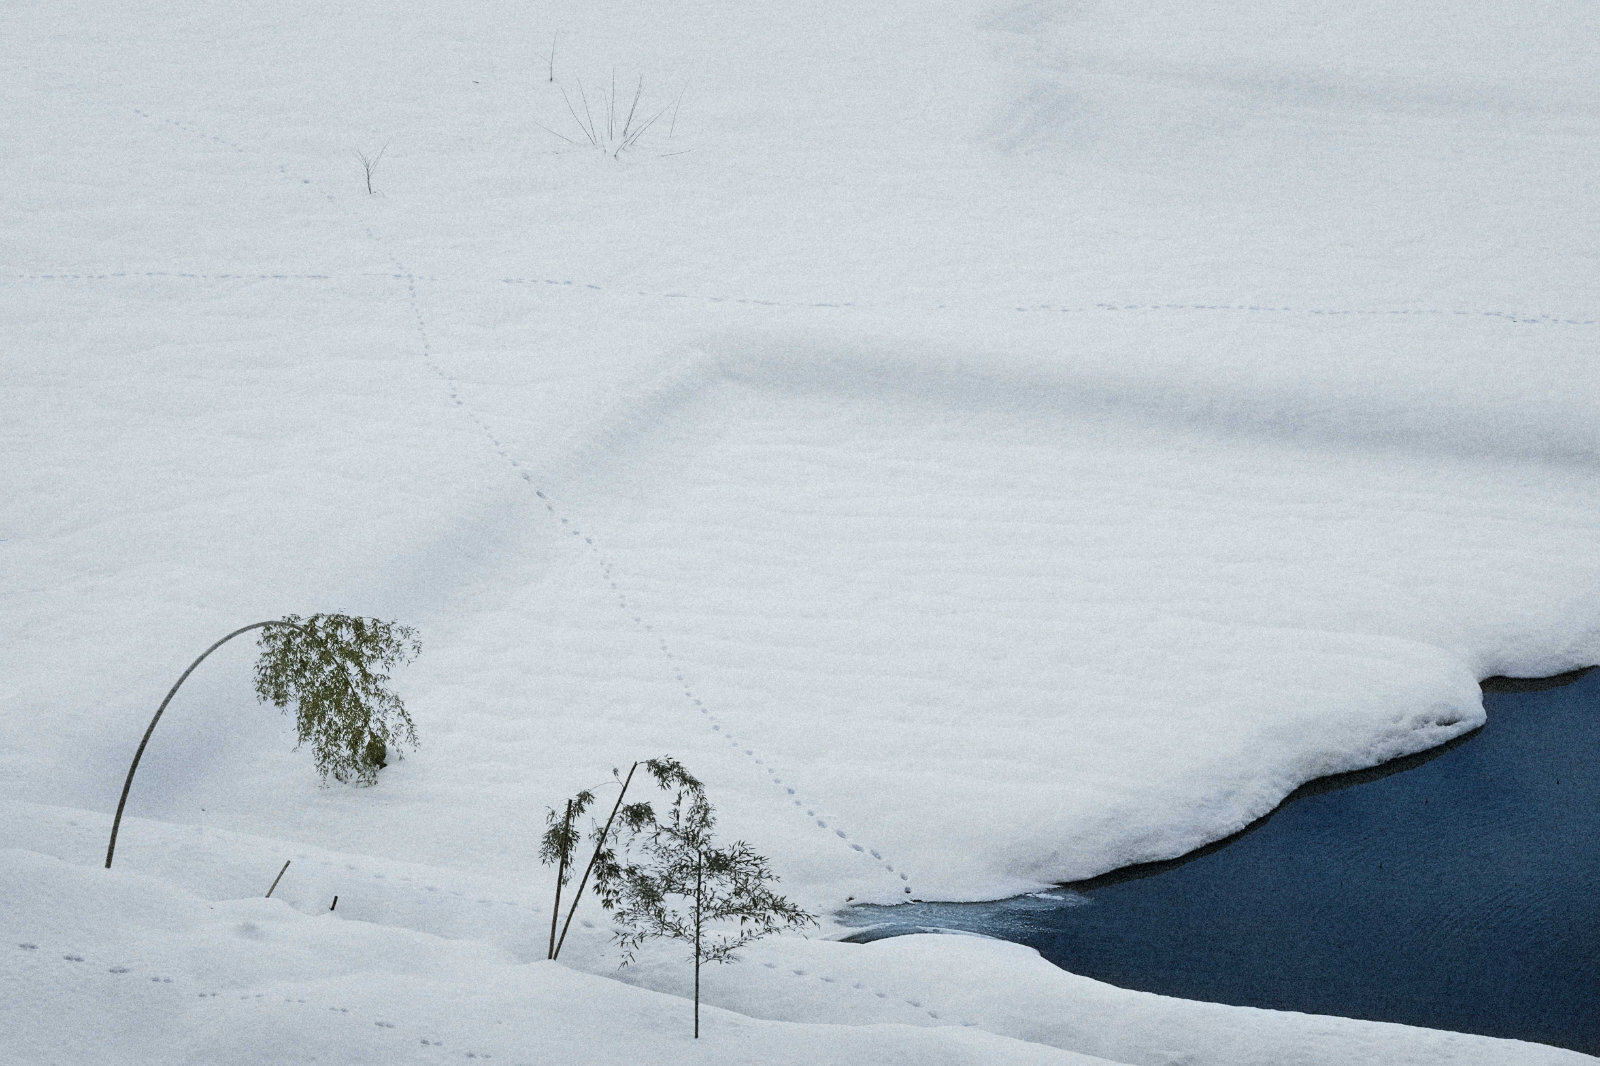 Footsteps-in-the-snow22_STEVE ATKINS PHOTOGRAPHY.jpg